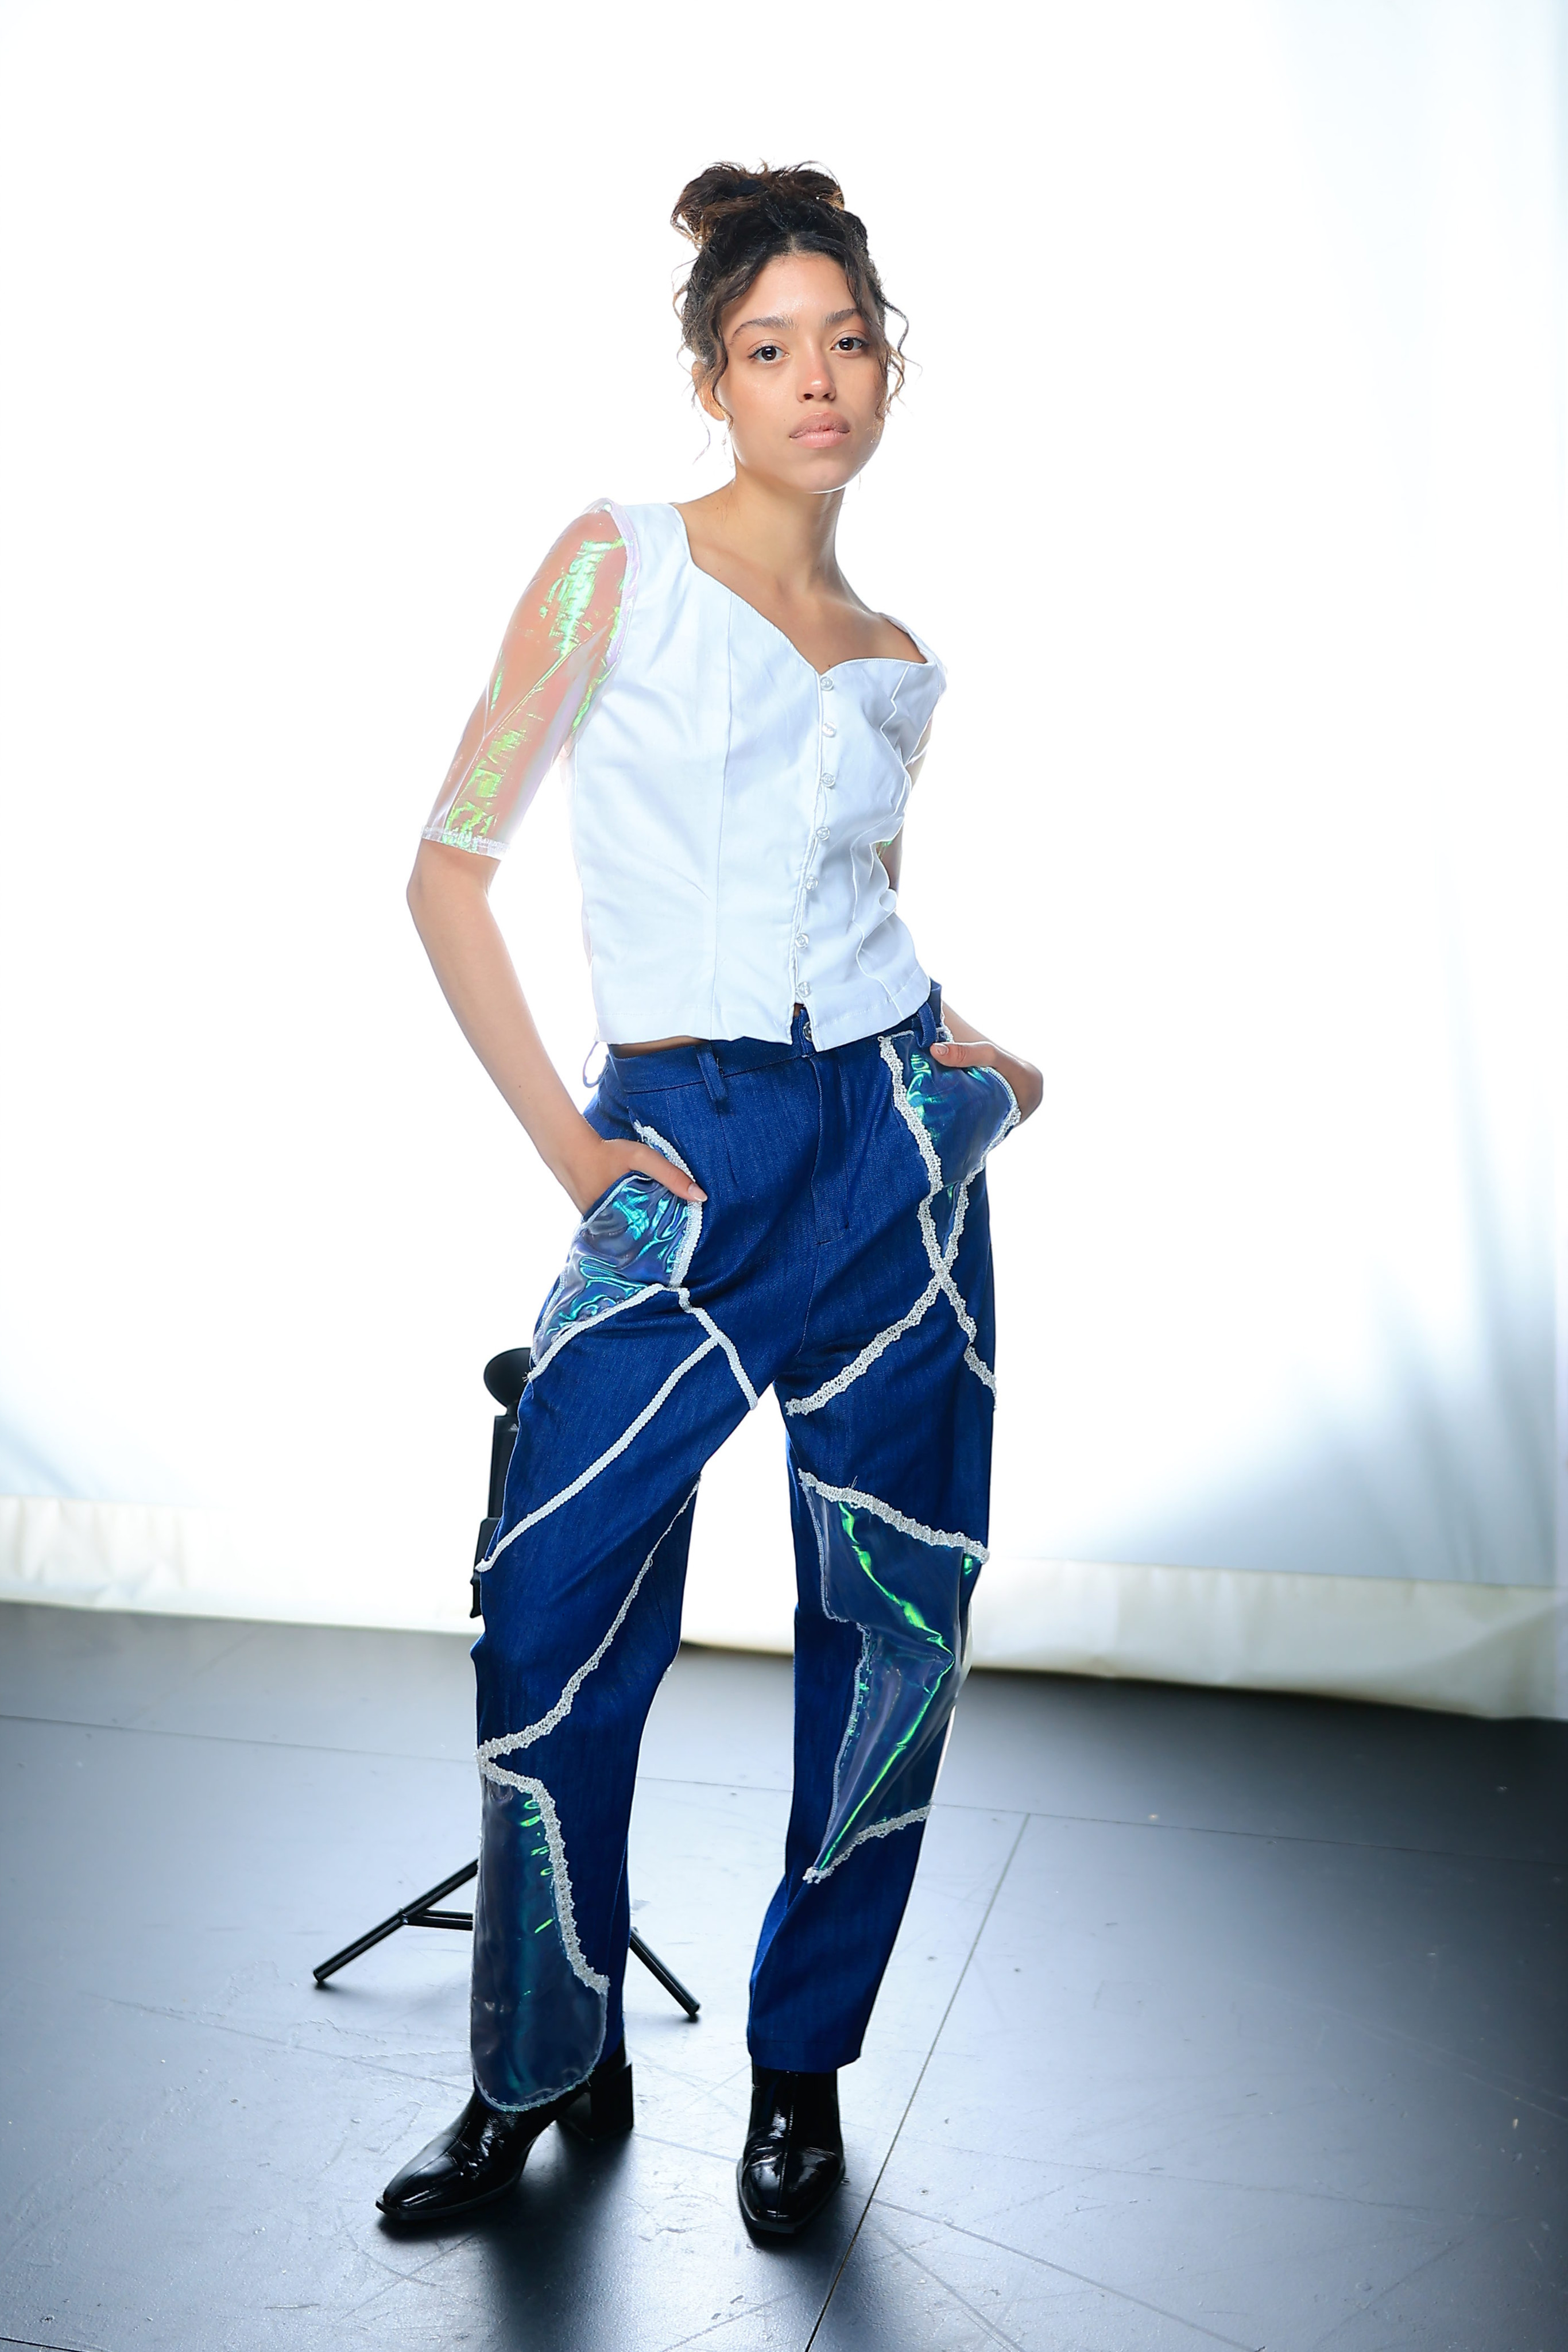 Model posing, dressed in a white top with holographic sleeves, and navy blue slacks with a holographic pattern and black heeled boots